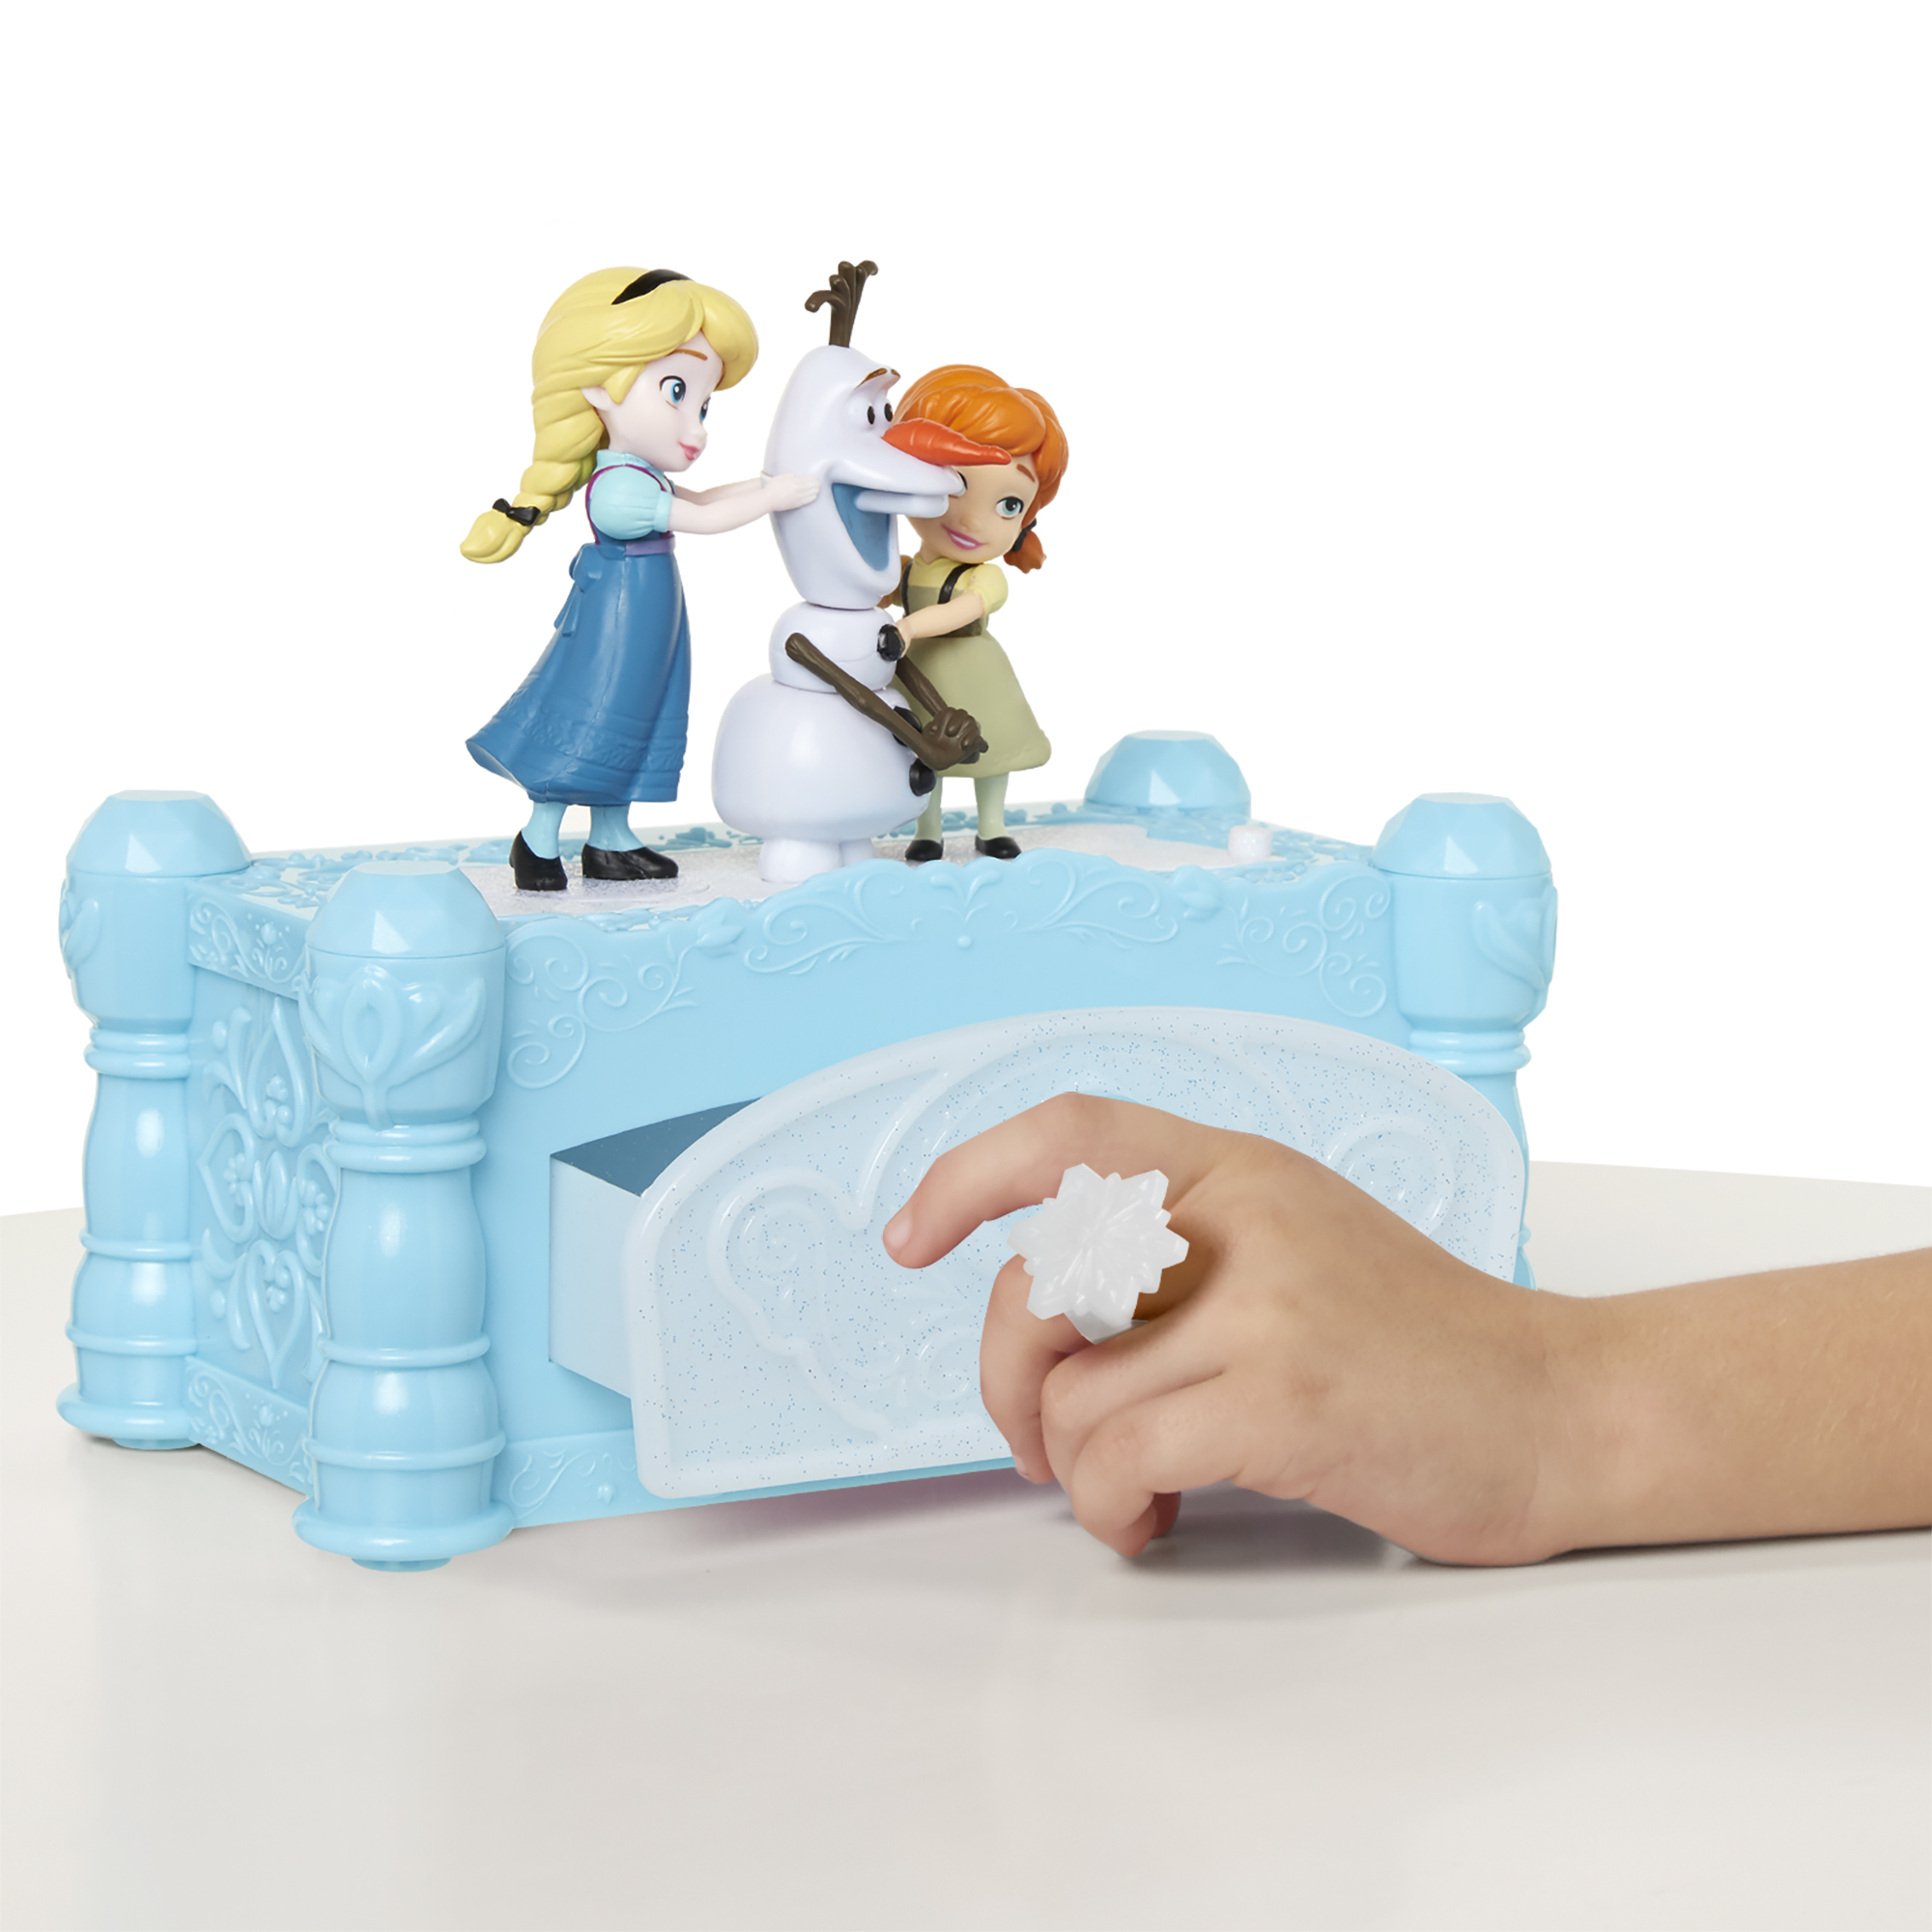 Disney Frozen Do You Want to Build A Snowman 2.0 Jewelry Box - image 3 of 12